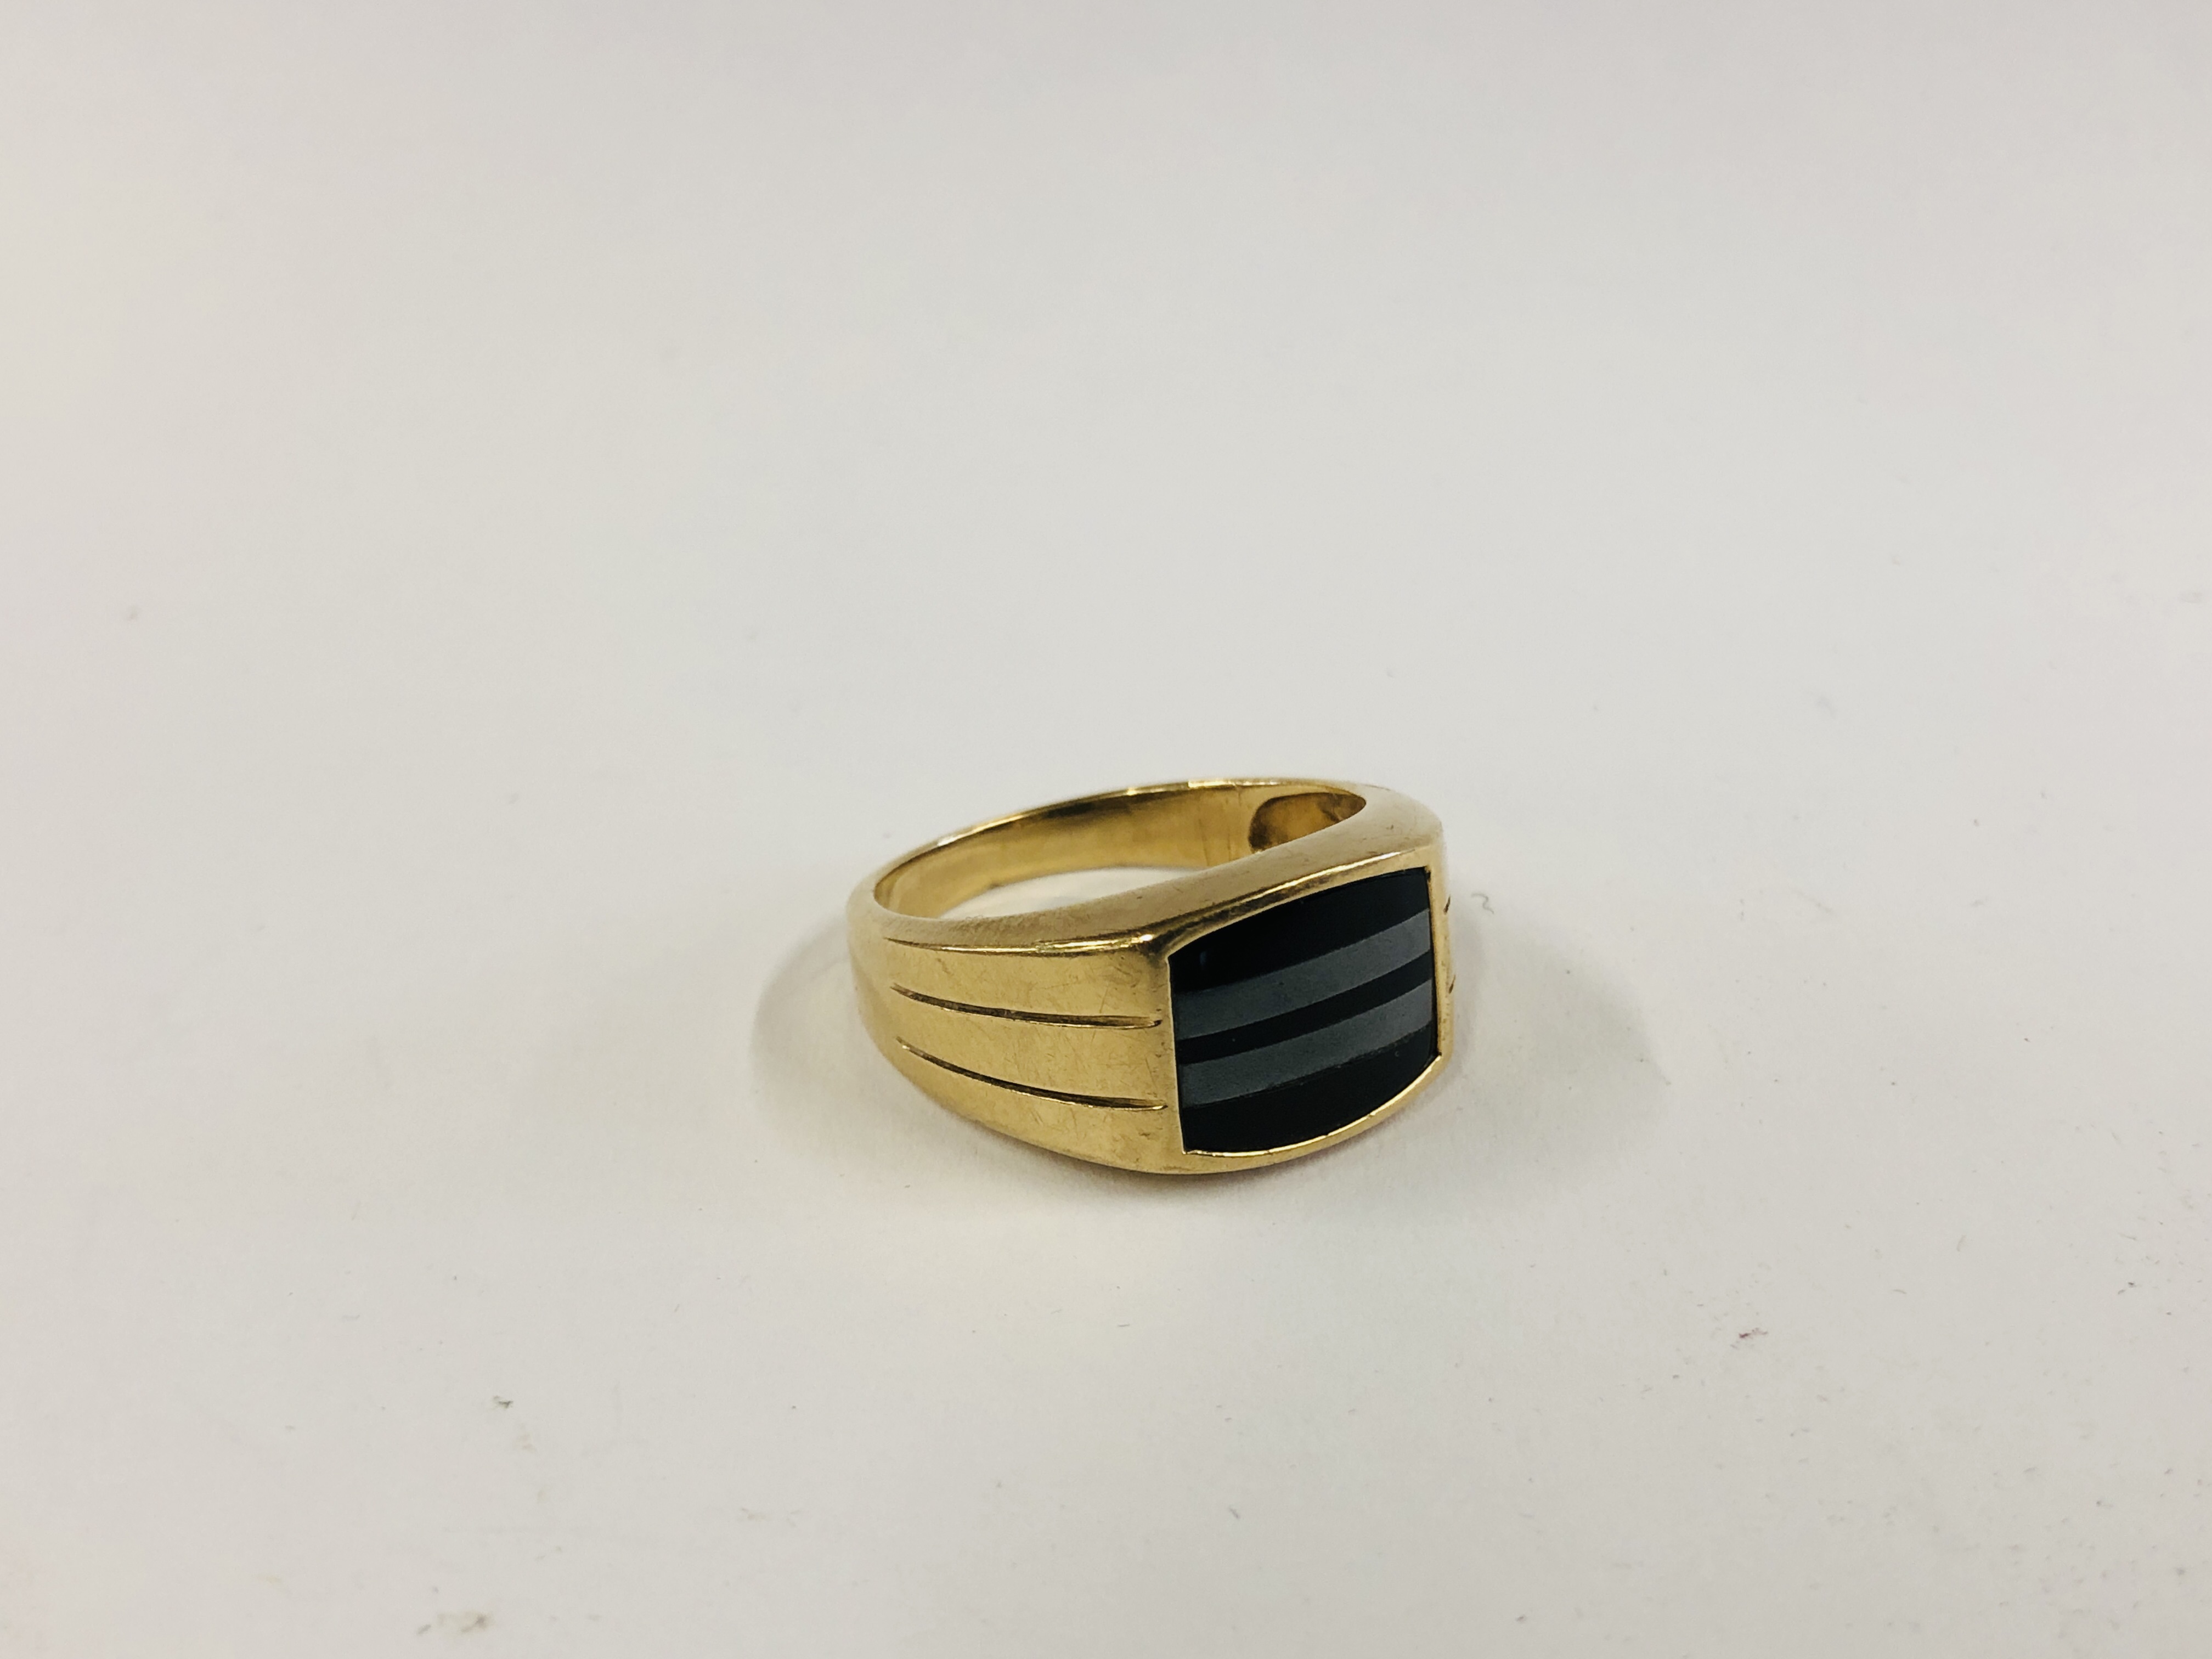 A GENT'S 9CT GOLD ONYX PANEL RING.